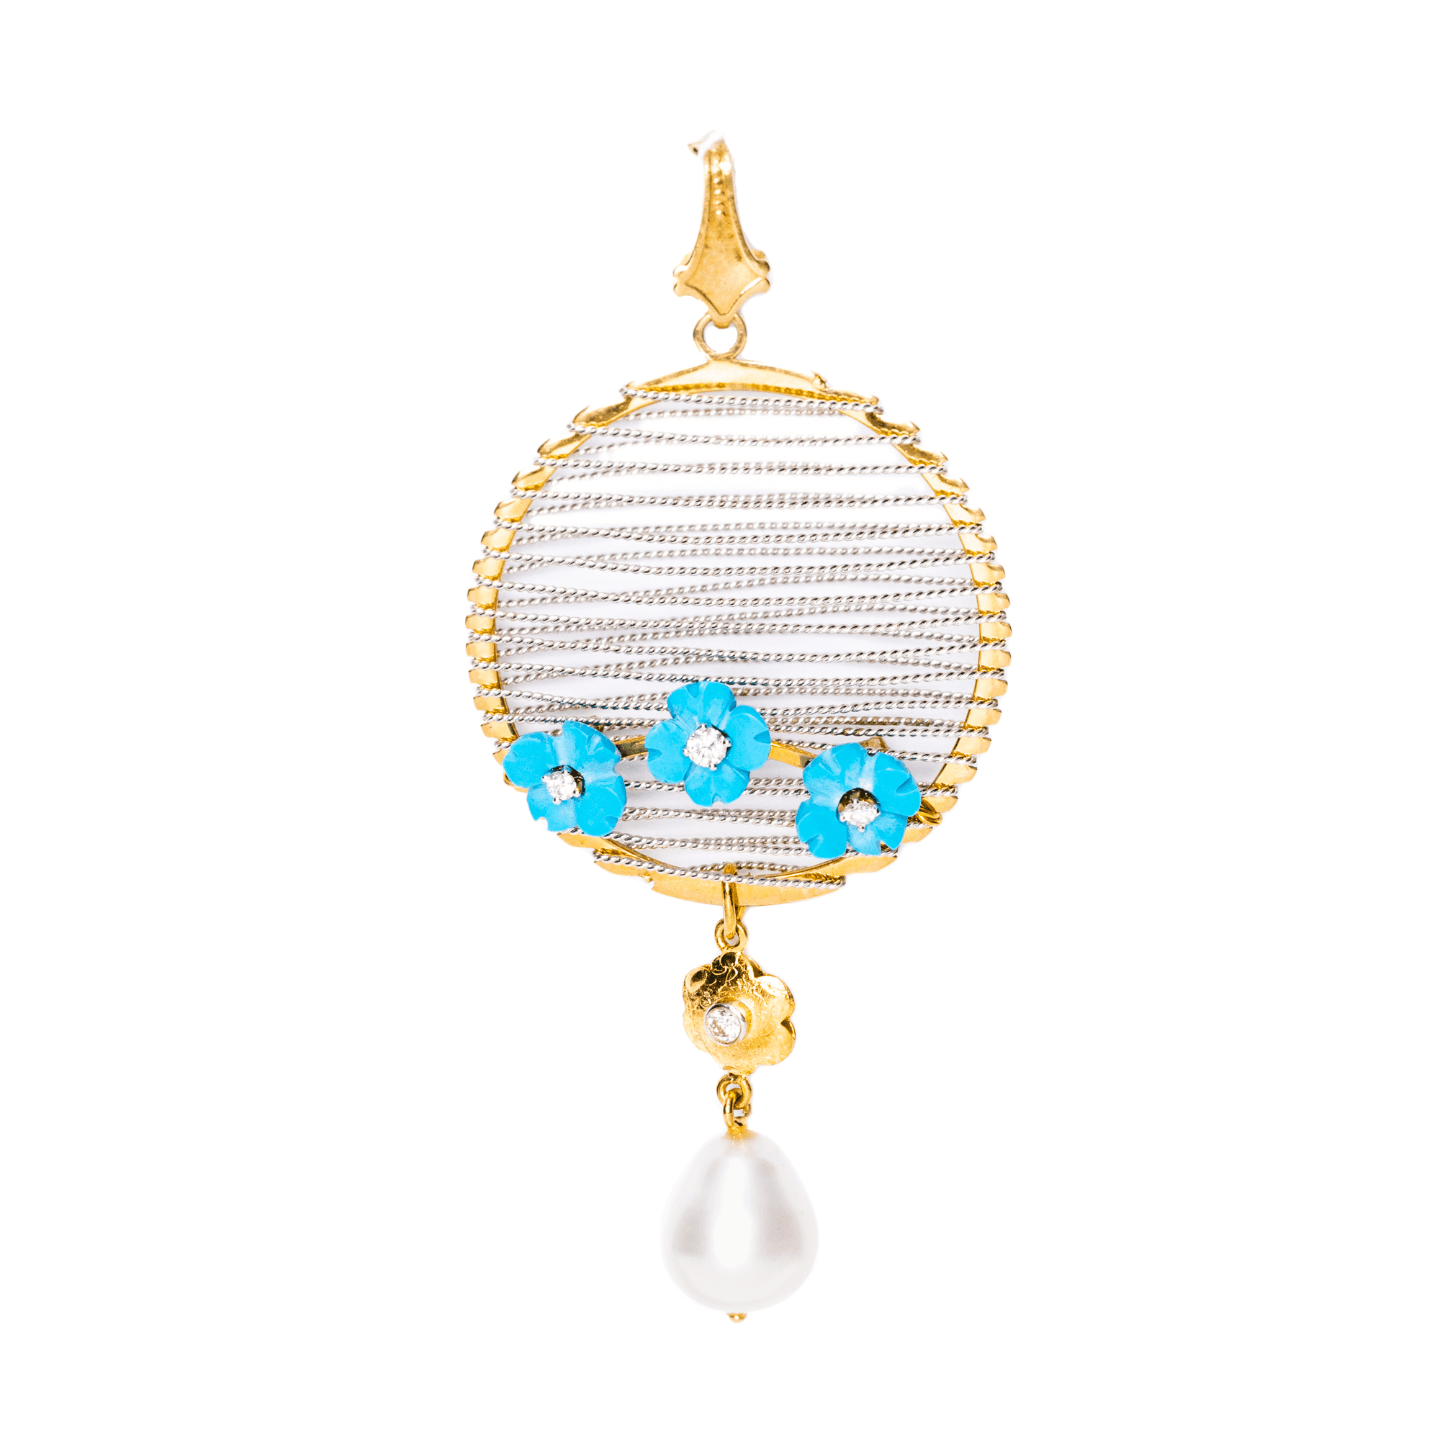 PD1701 - Fanciful Filigree - Delicate Wire Wrapped Pendant with Turquoise and Pearl